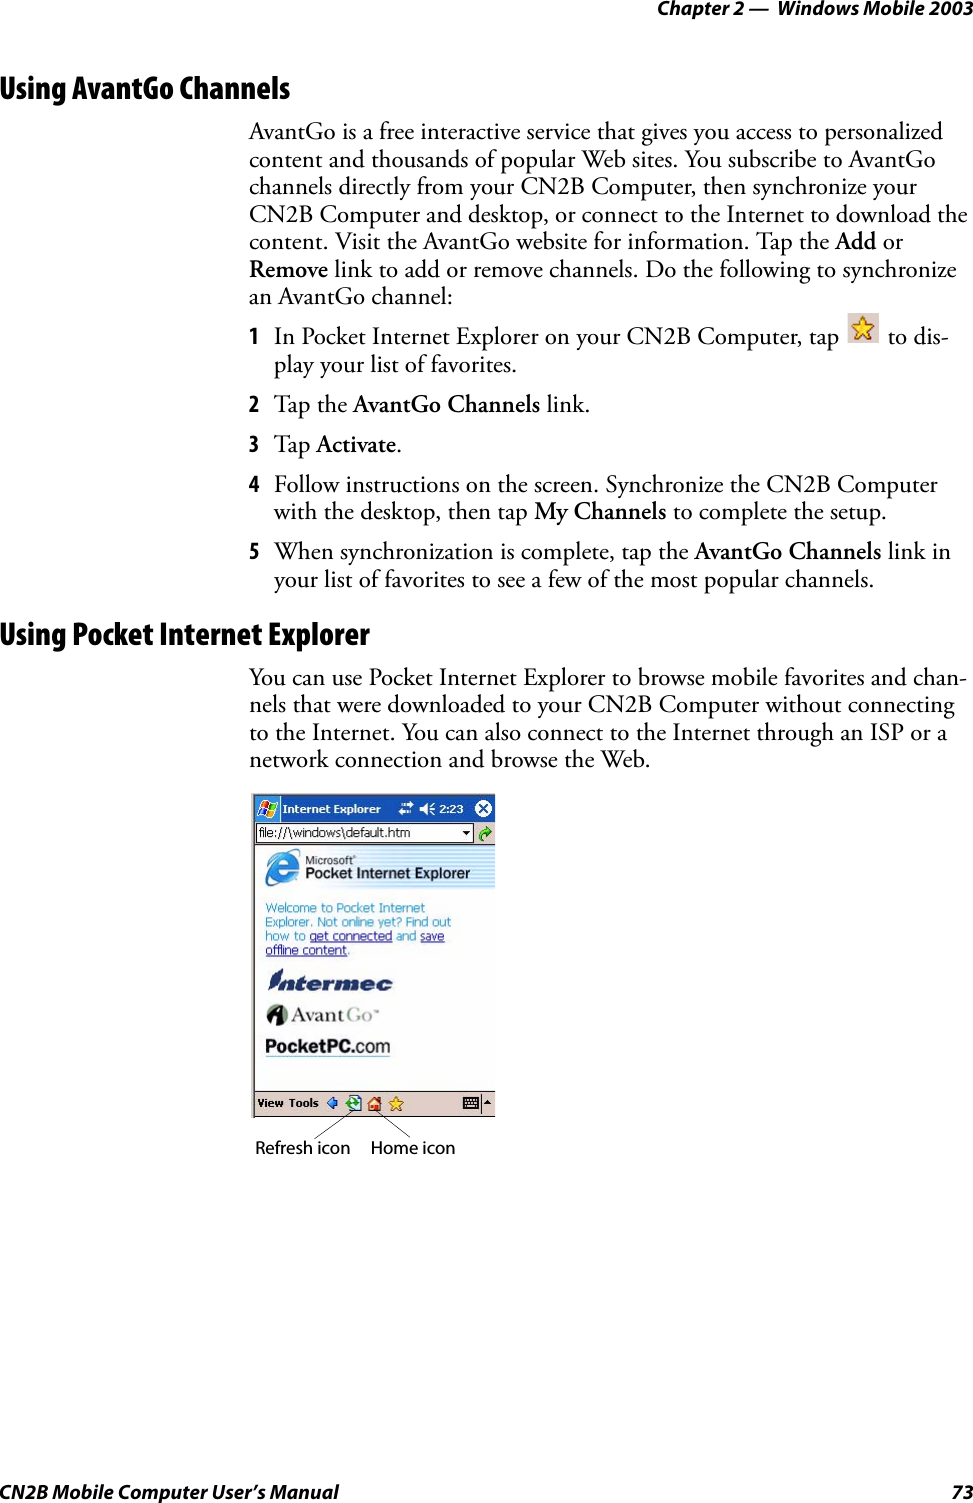 Chapter 2 —  Windows Mobile 2003CN2B Mobile Computer User’s Manual 73Using AvantGo ChannelsAvantGo is a free interactive service that gives you access to personalized content and thousands of popular Web sites. You subscribe to AvantGo channels directly from your CN2B Computer, then synchronize your CN2B Computer and desktop, or connect to the Internet to download the content. Visit the AvantGo website for information. Tap the Add or Remove link to add or remove channels. Do the following to synchronize an AvantGo channel:1In Pocket Internet Explorer on your CN2B Computer, tap   to dis-play your list of favorites.2Tap the AvantGo Channels link.3Tap Activate.4Follow instructions on the screen. Synchronize the CN2B Computer with the desktop, then tap My Channels to complete the setup.5When synchronization is complete, tap the AvantGo Channels link in your list of favorites to see a few of the most popular channels. Using Pocket Internet ExplorerYou can use Pocket Internet Explorer to browse mobile favorites and chan-nels that were downloaded to your CN2B Computer without connecting to the Internet. You can also connect to the Internet through an ISP or a network connection and browse the Web.Refresh icon Home icon